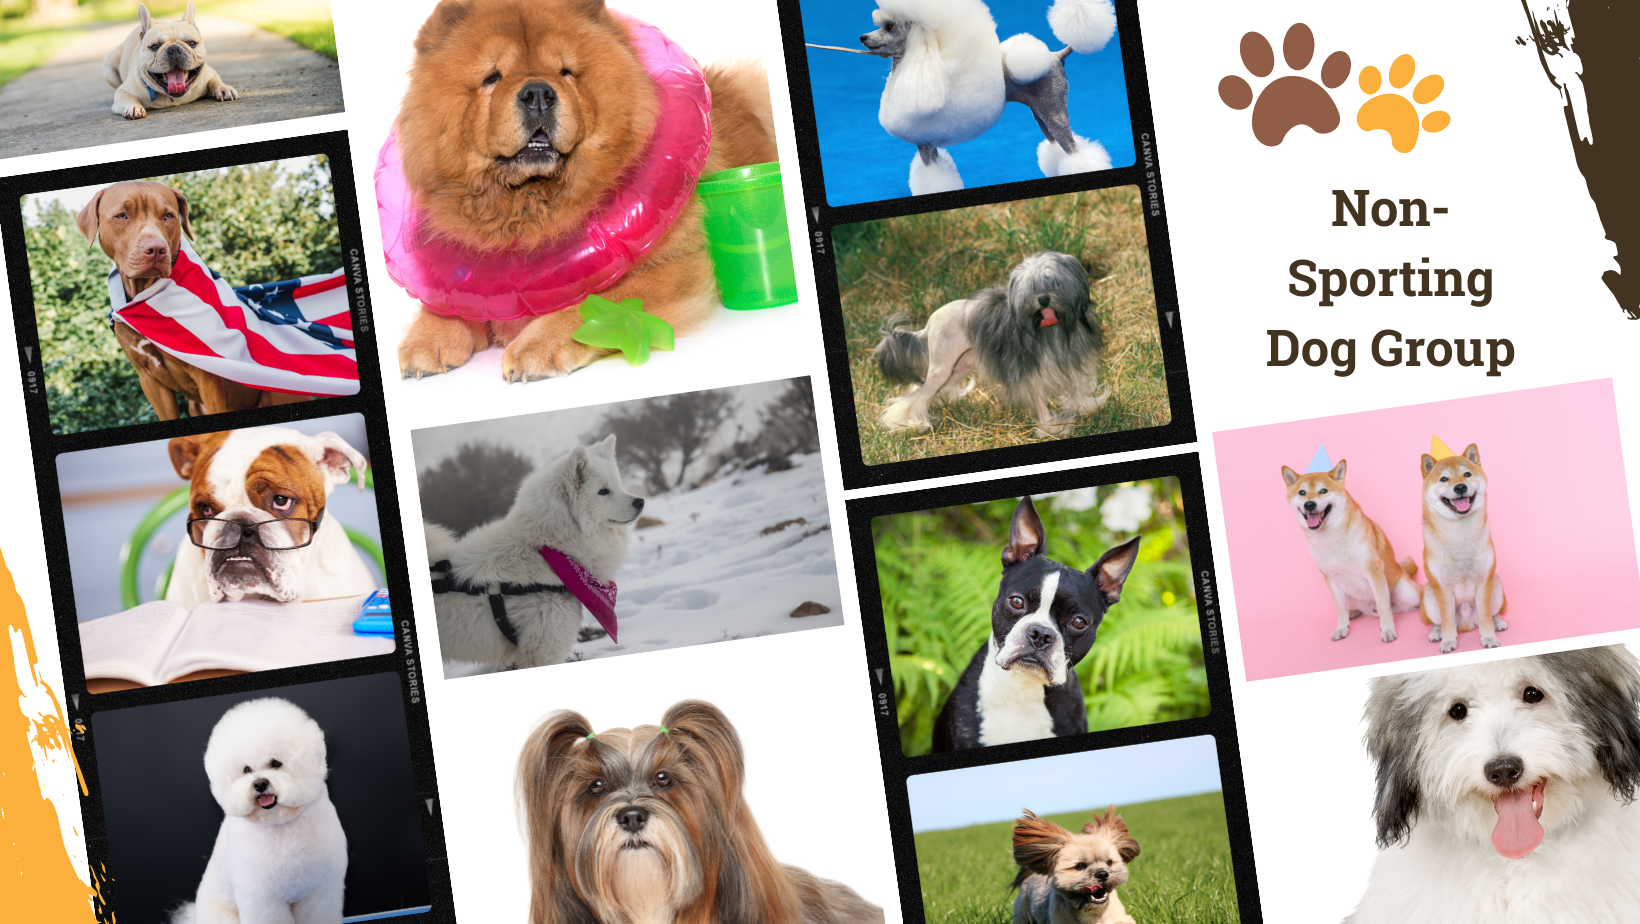 Dog Breed Archive Non-Sporting Group